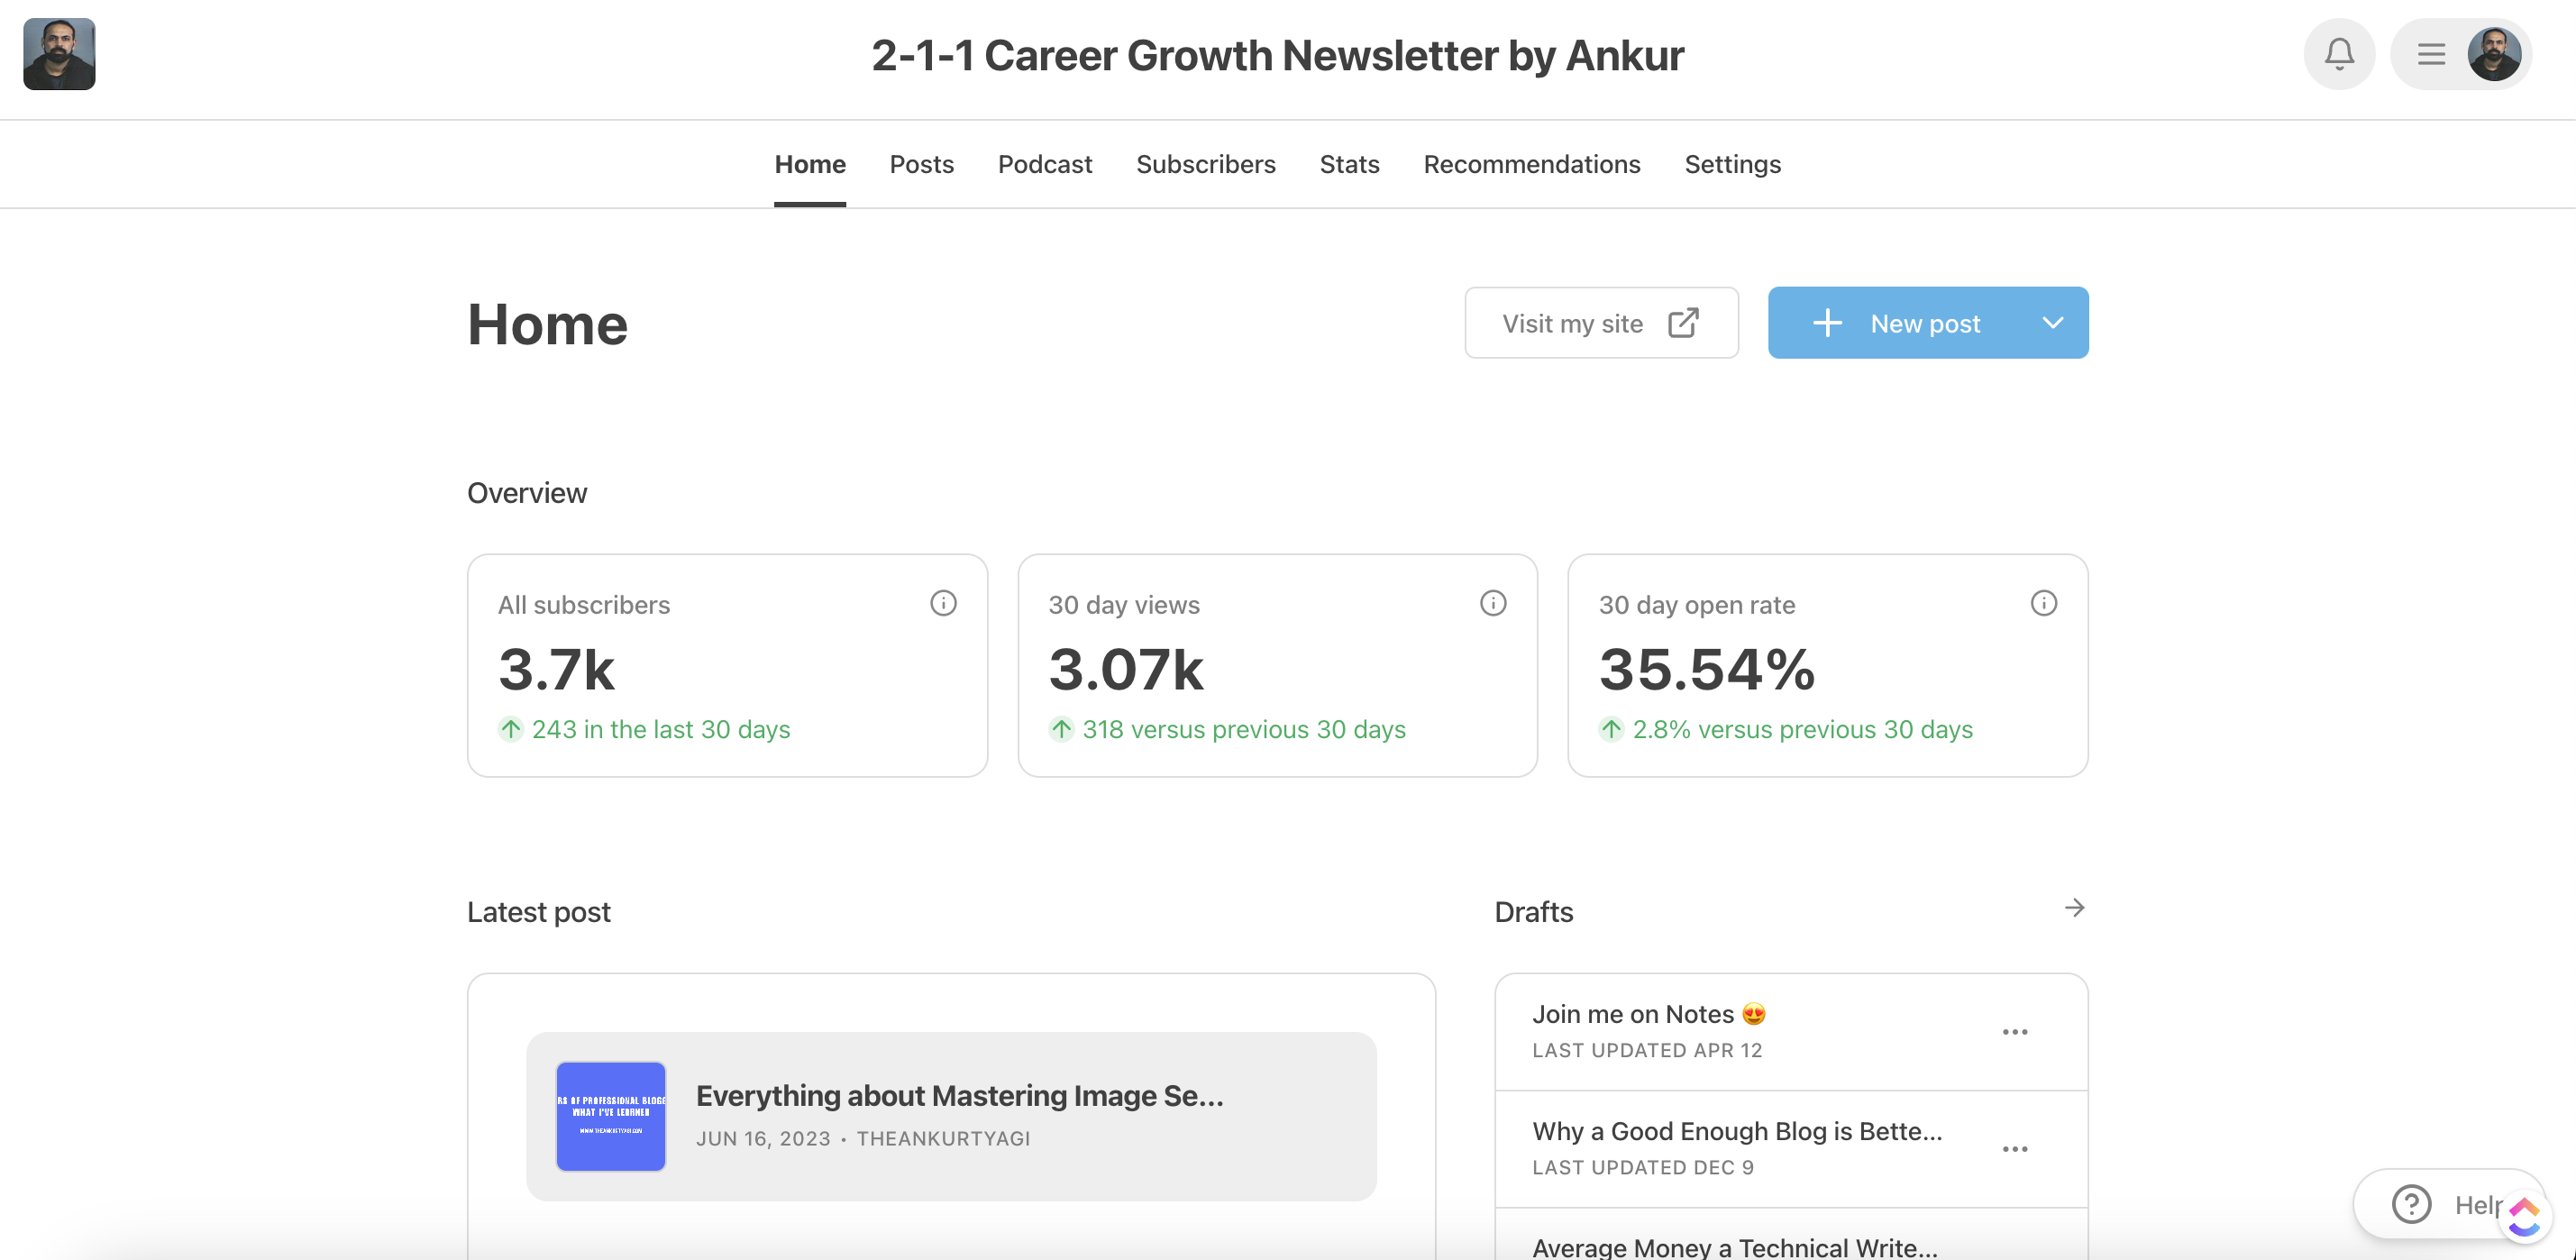 2-1-1 Career Growth Newsletter by Ankur
